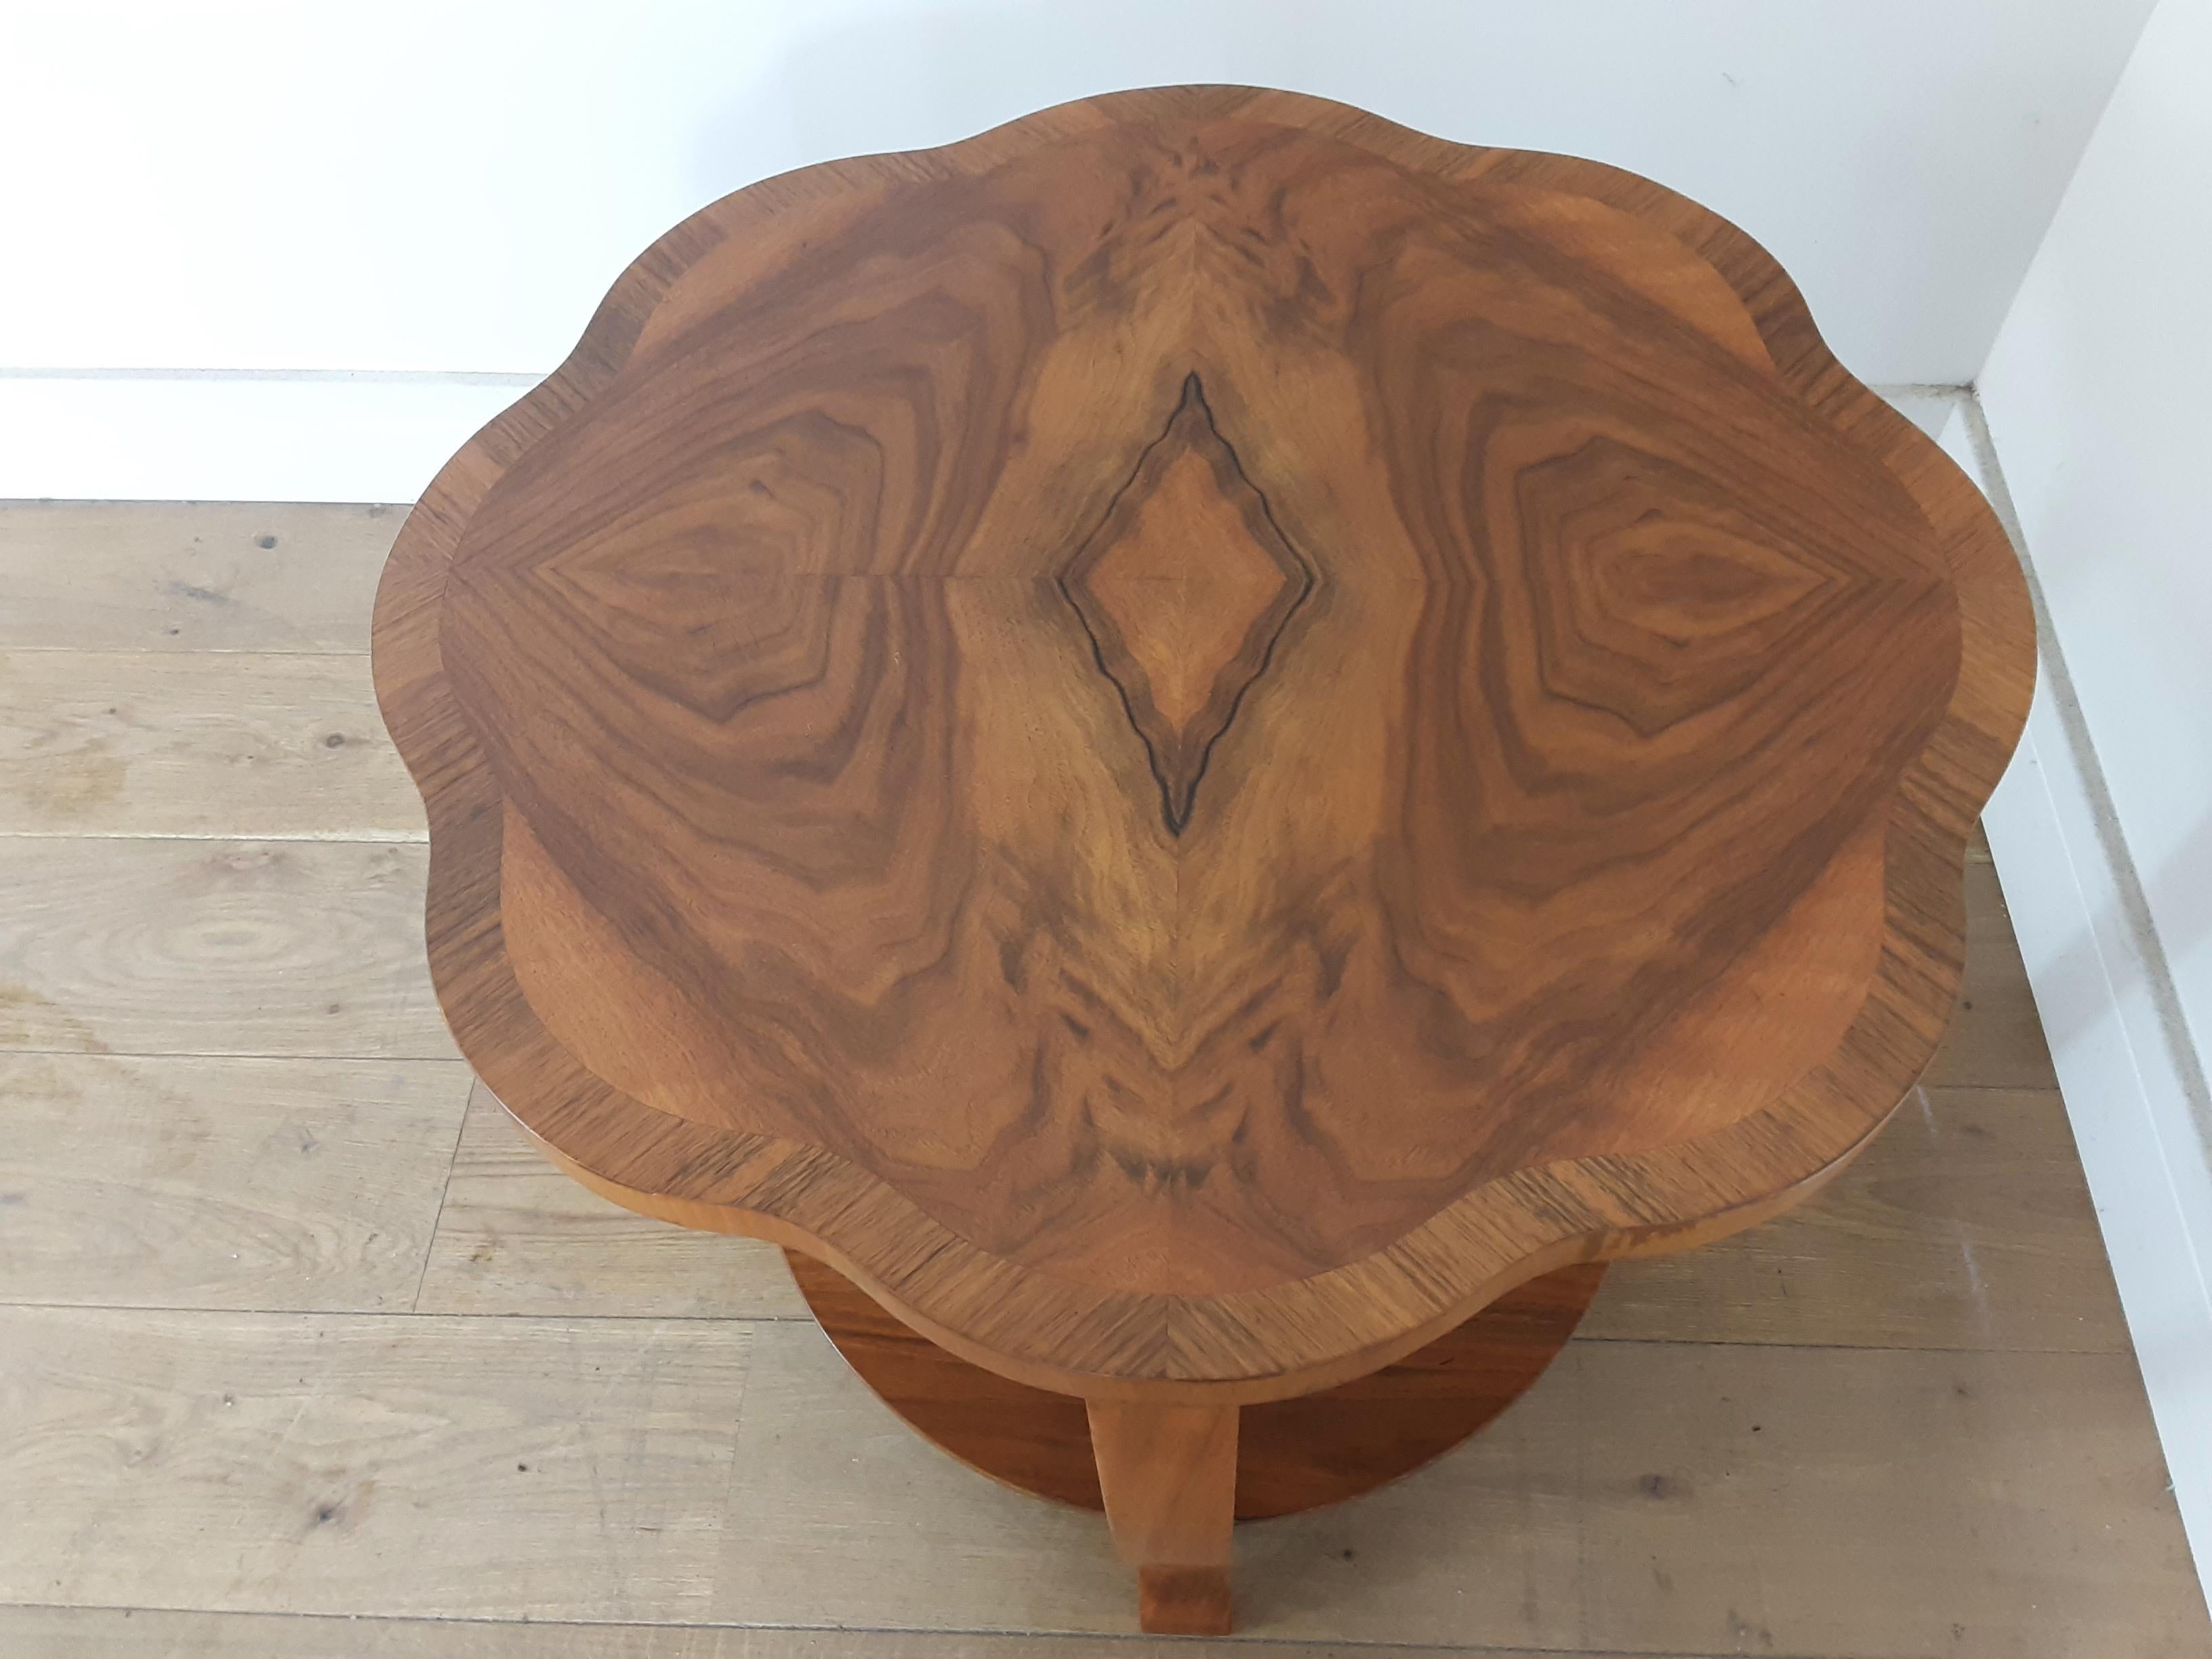 20th Century British Art Deco Figured Walnut Table with a Beautiful Scalloped Edge For Sale